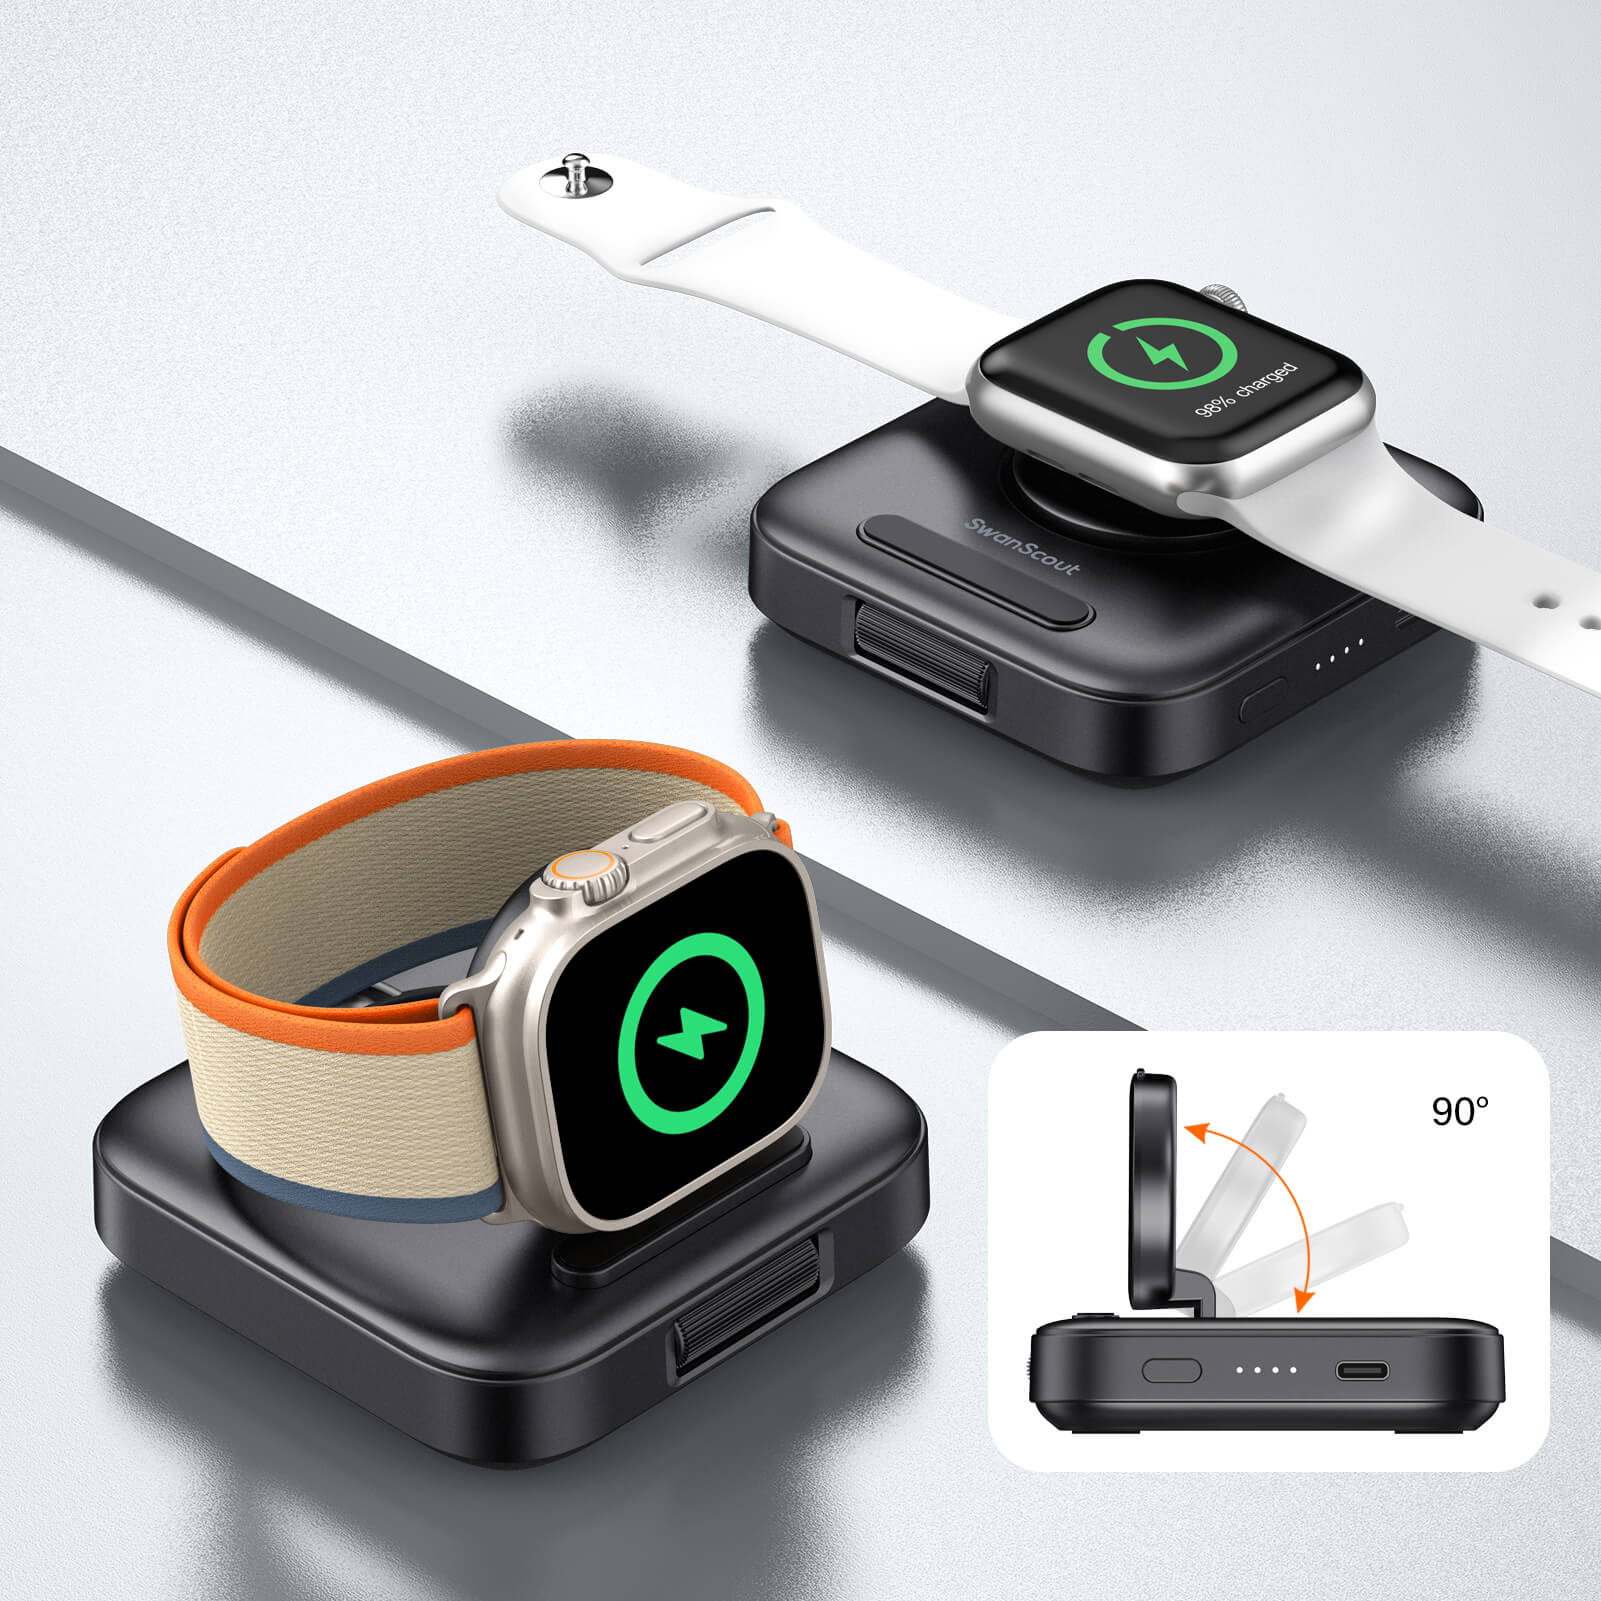 Charging Station for Apple Watch: Foldable & Portable Design, Safe Charging, Case Friendly, with Intelligent LED Indicator. The SwanScout Charging Station for Apple Watch is designed for on-the-go power and speed, ensuring your Watch devices stay charged wherever you are.